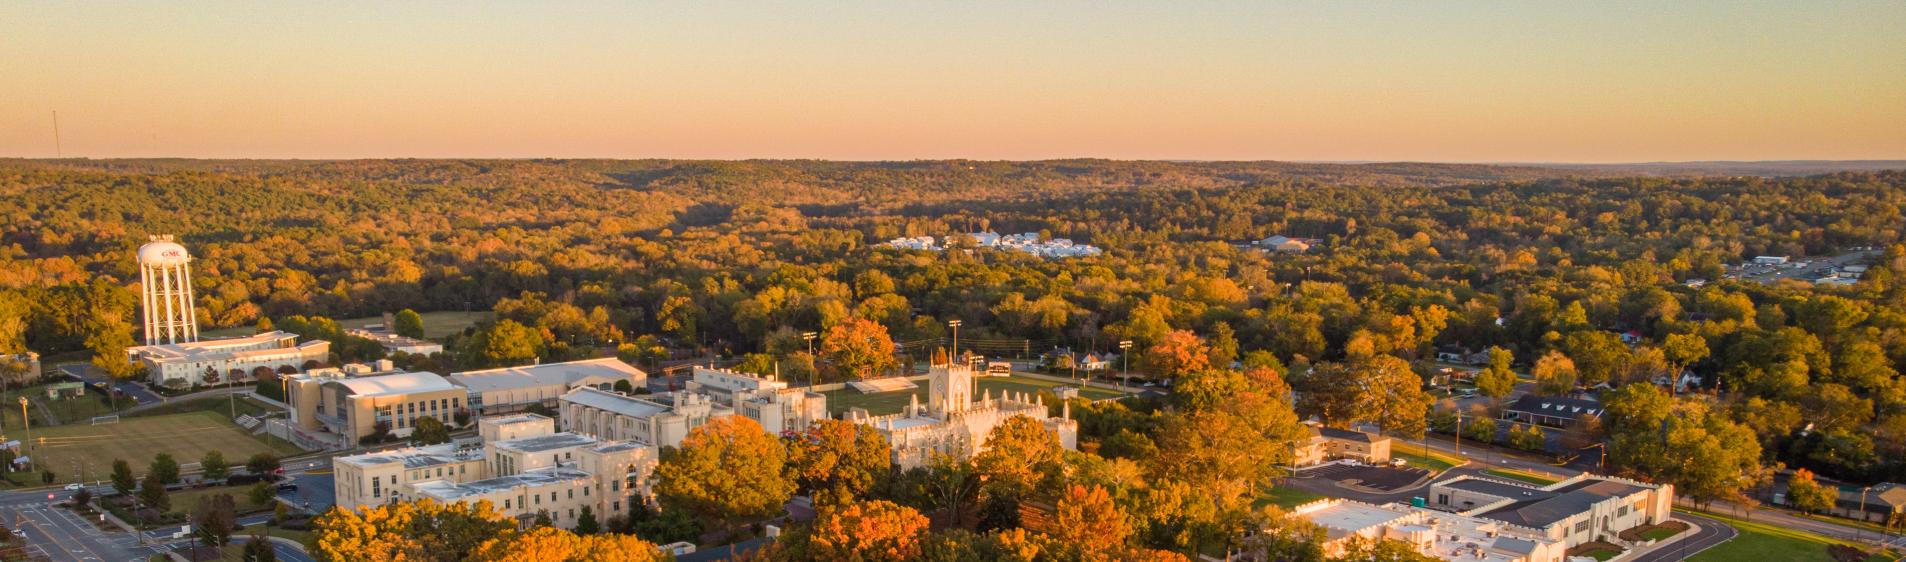 Aerial view of downtown Milledgeville, GA in fall